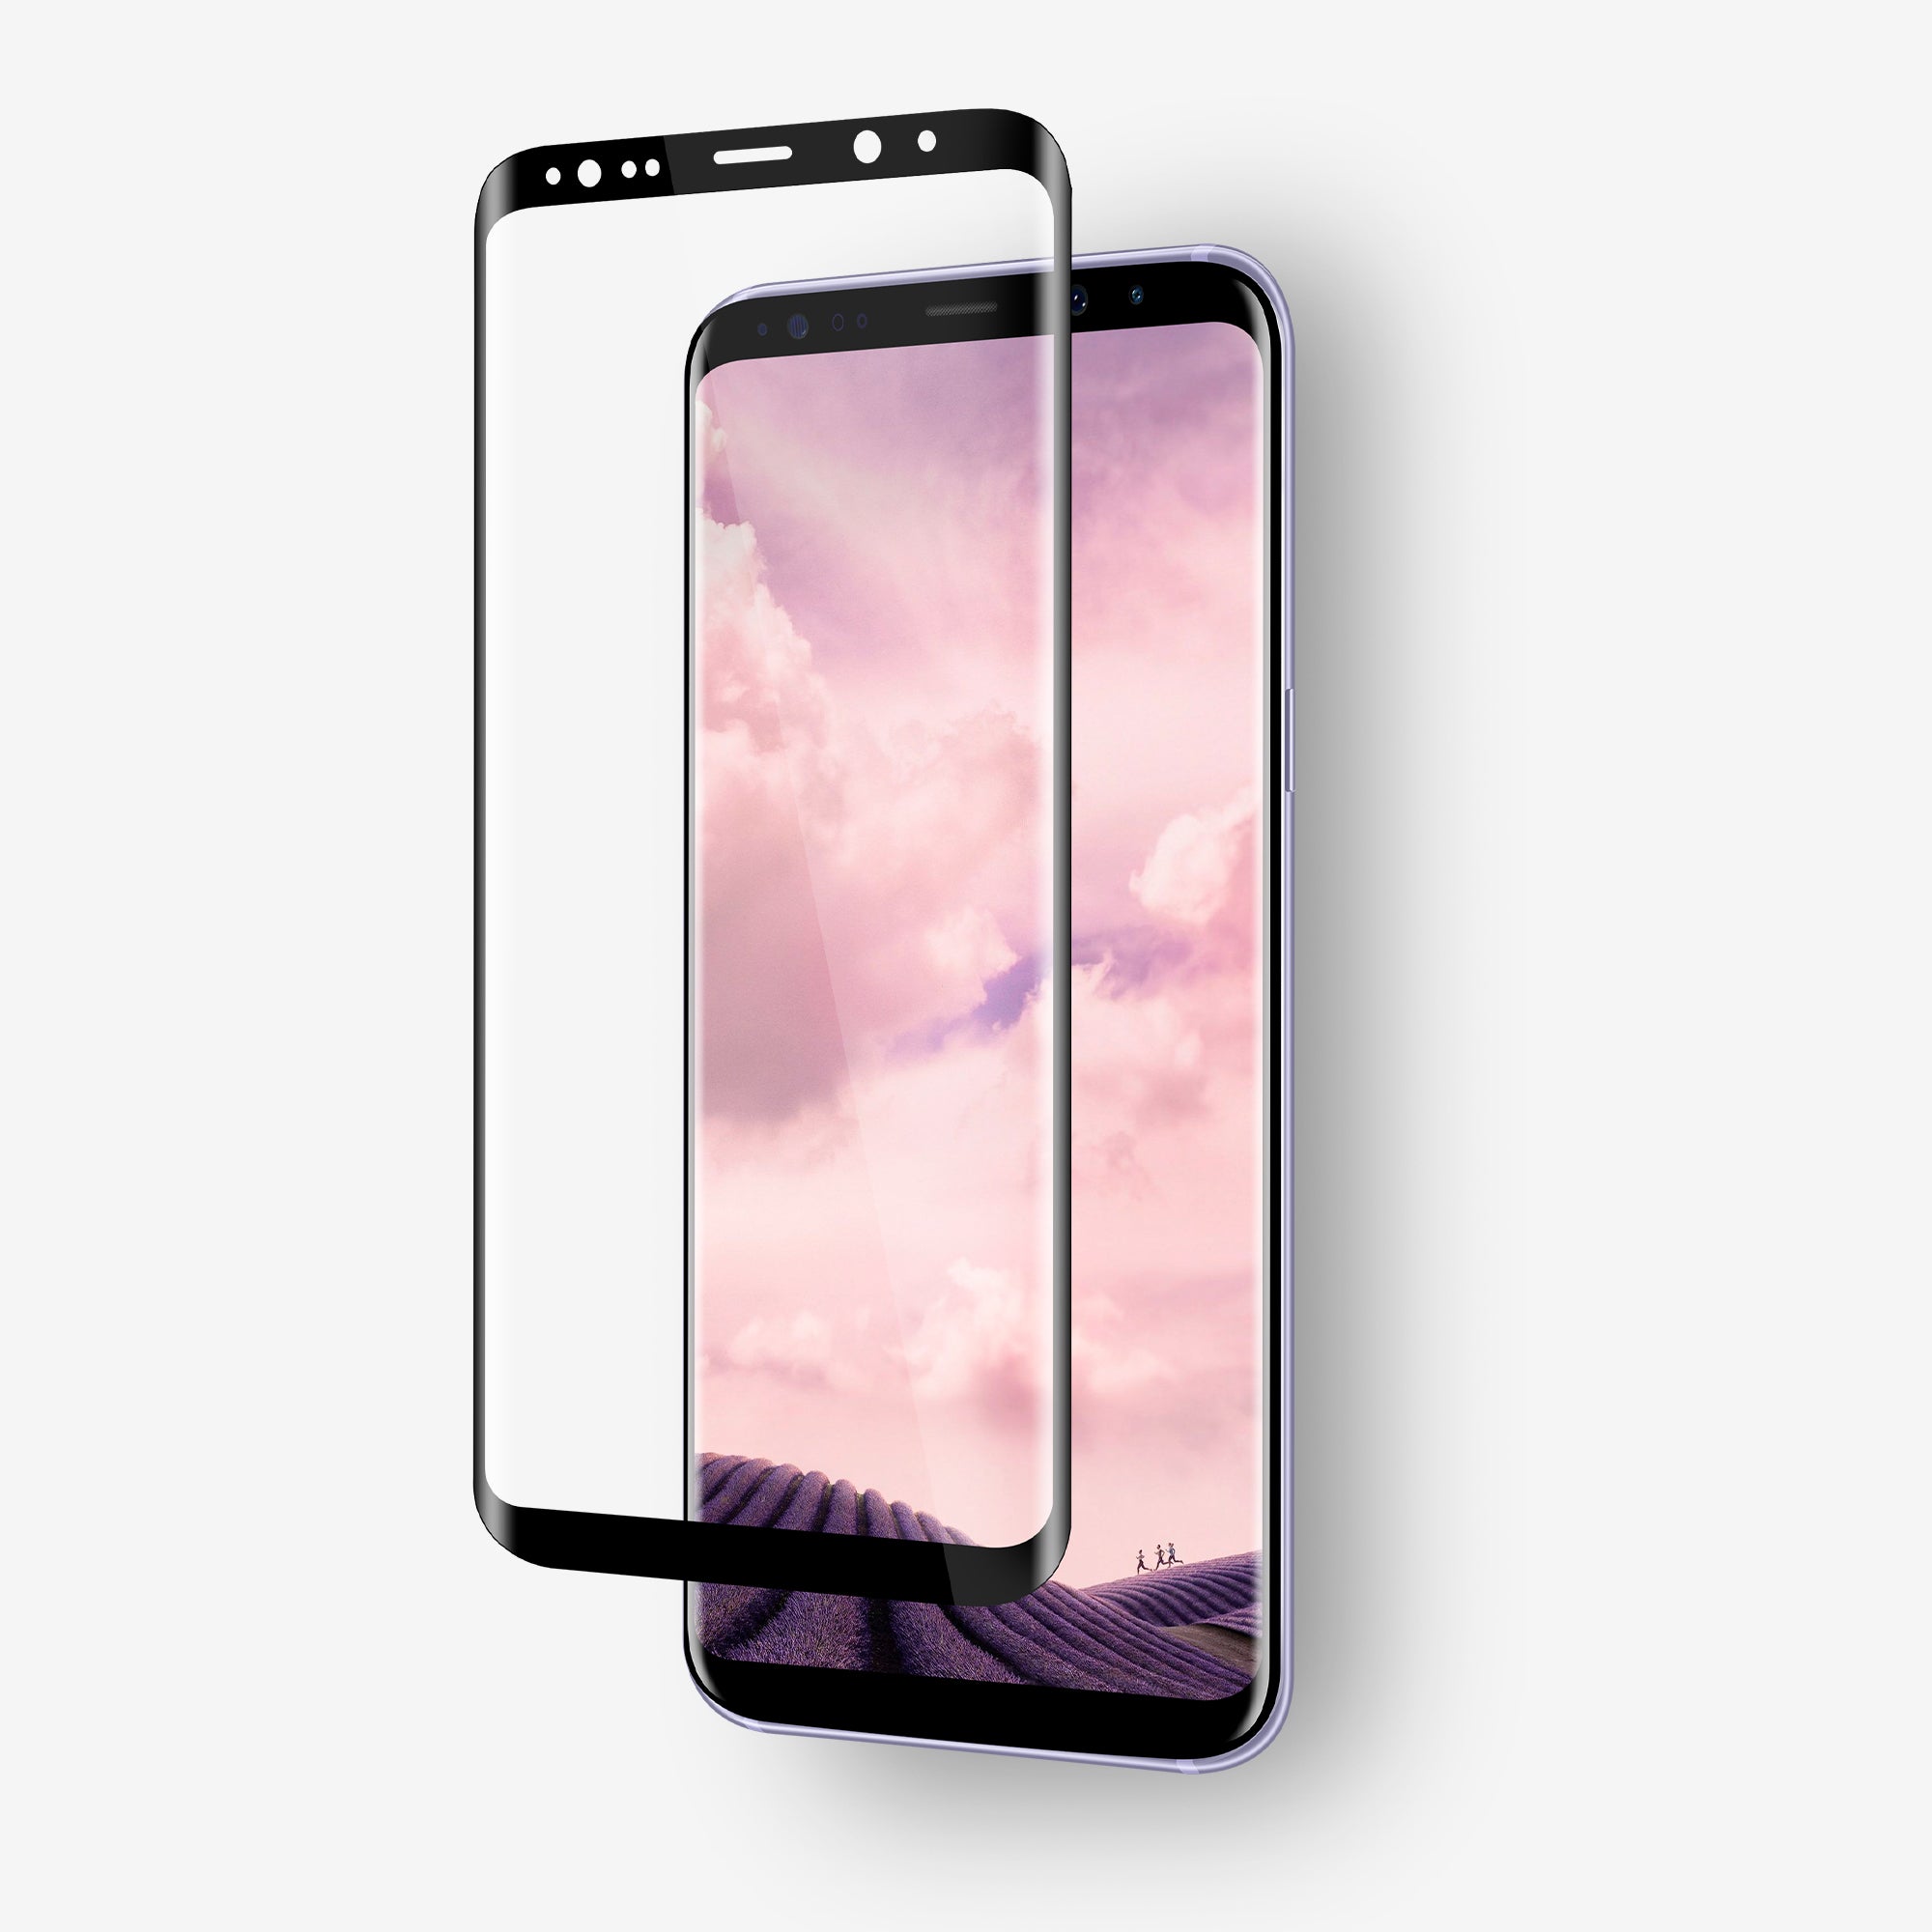 Un pan Arrastrarse combustible Screen Protector for Galaxy S8 Plus | FLOLAB